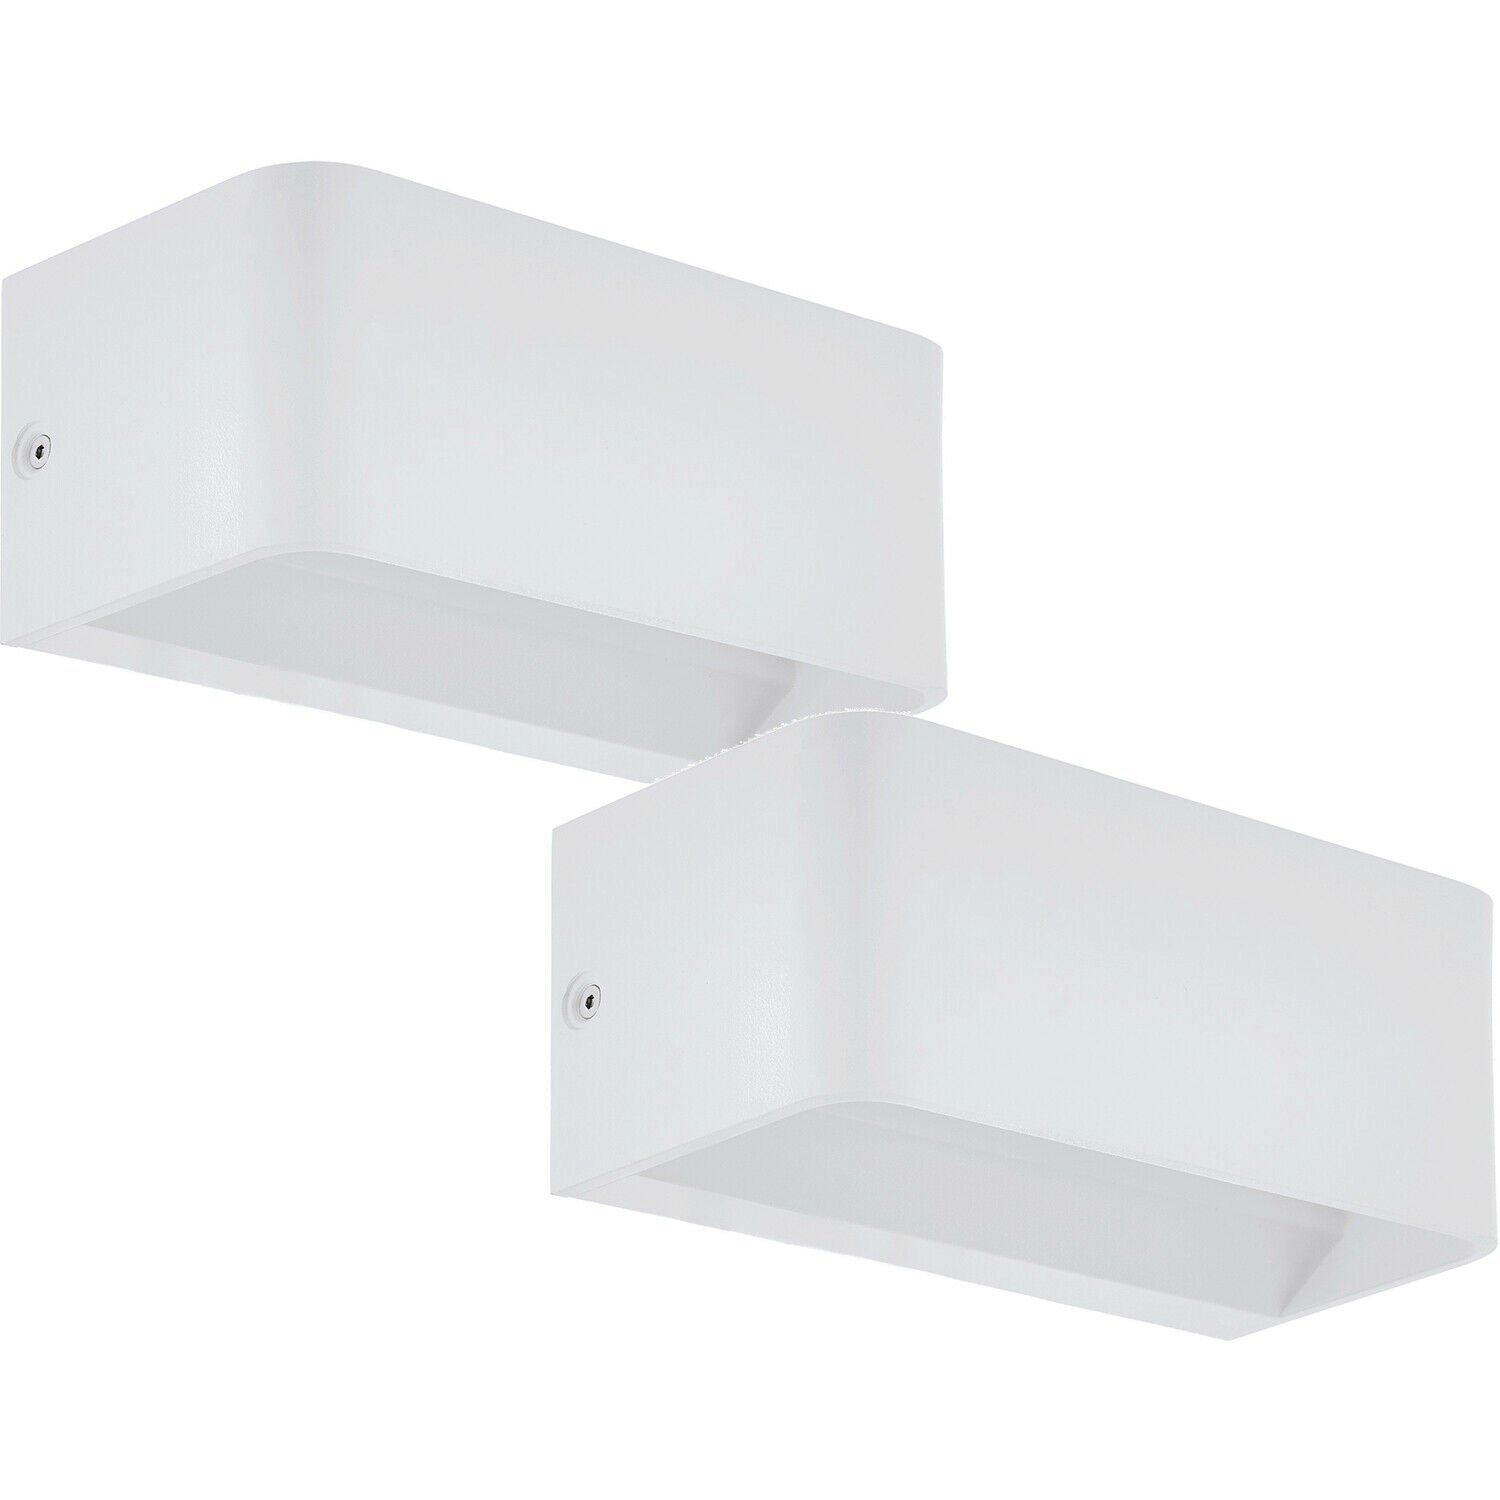 2 PACK Wall Light Colour White Long Box Structure Snug Fitting LED 10W Included